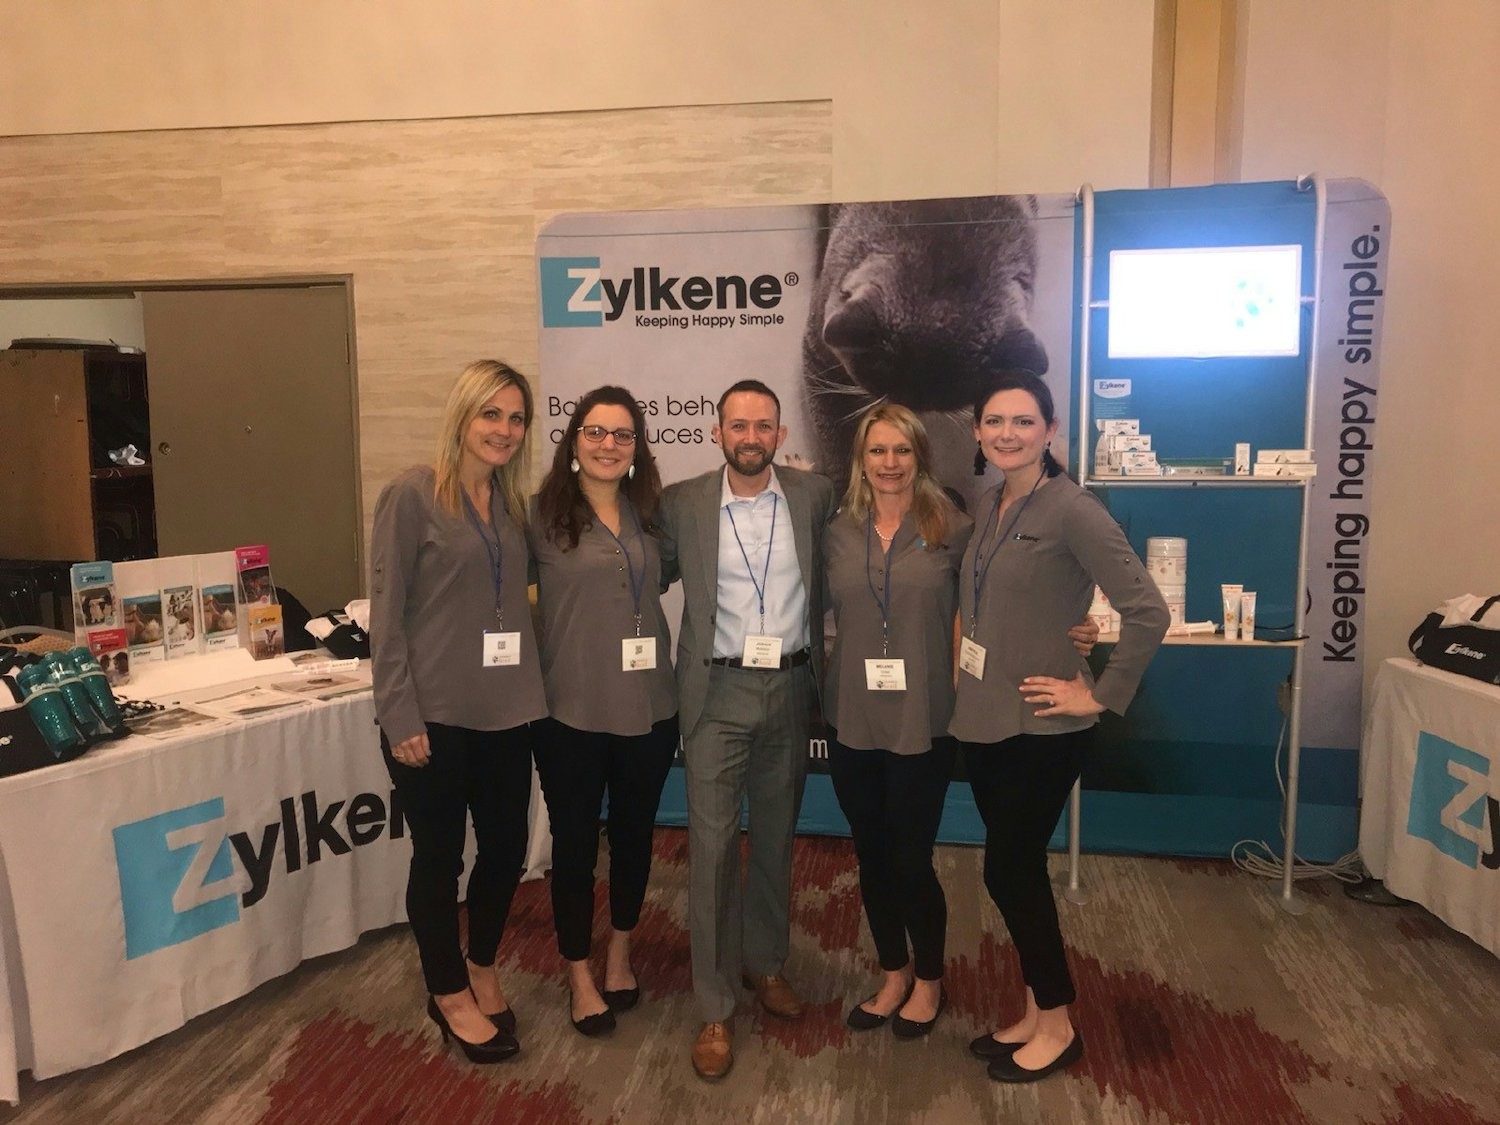 Wonderful employees at our Zylkene Booth at an event!